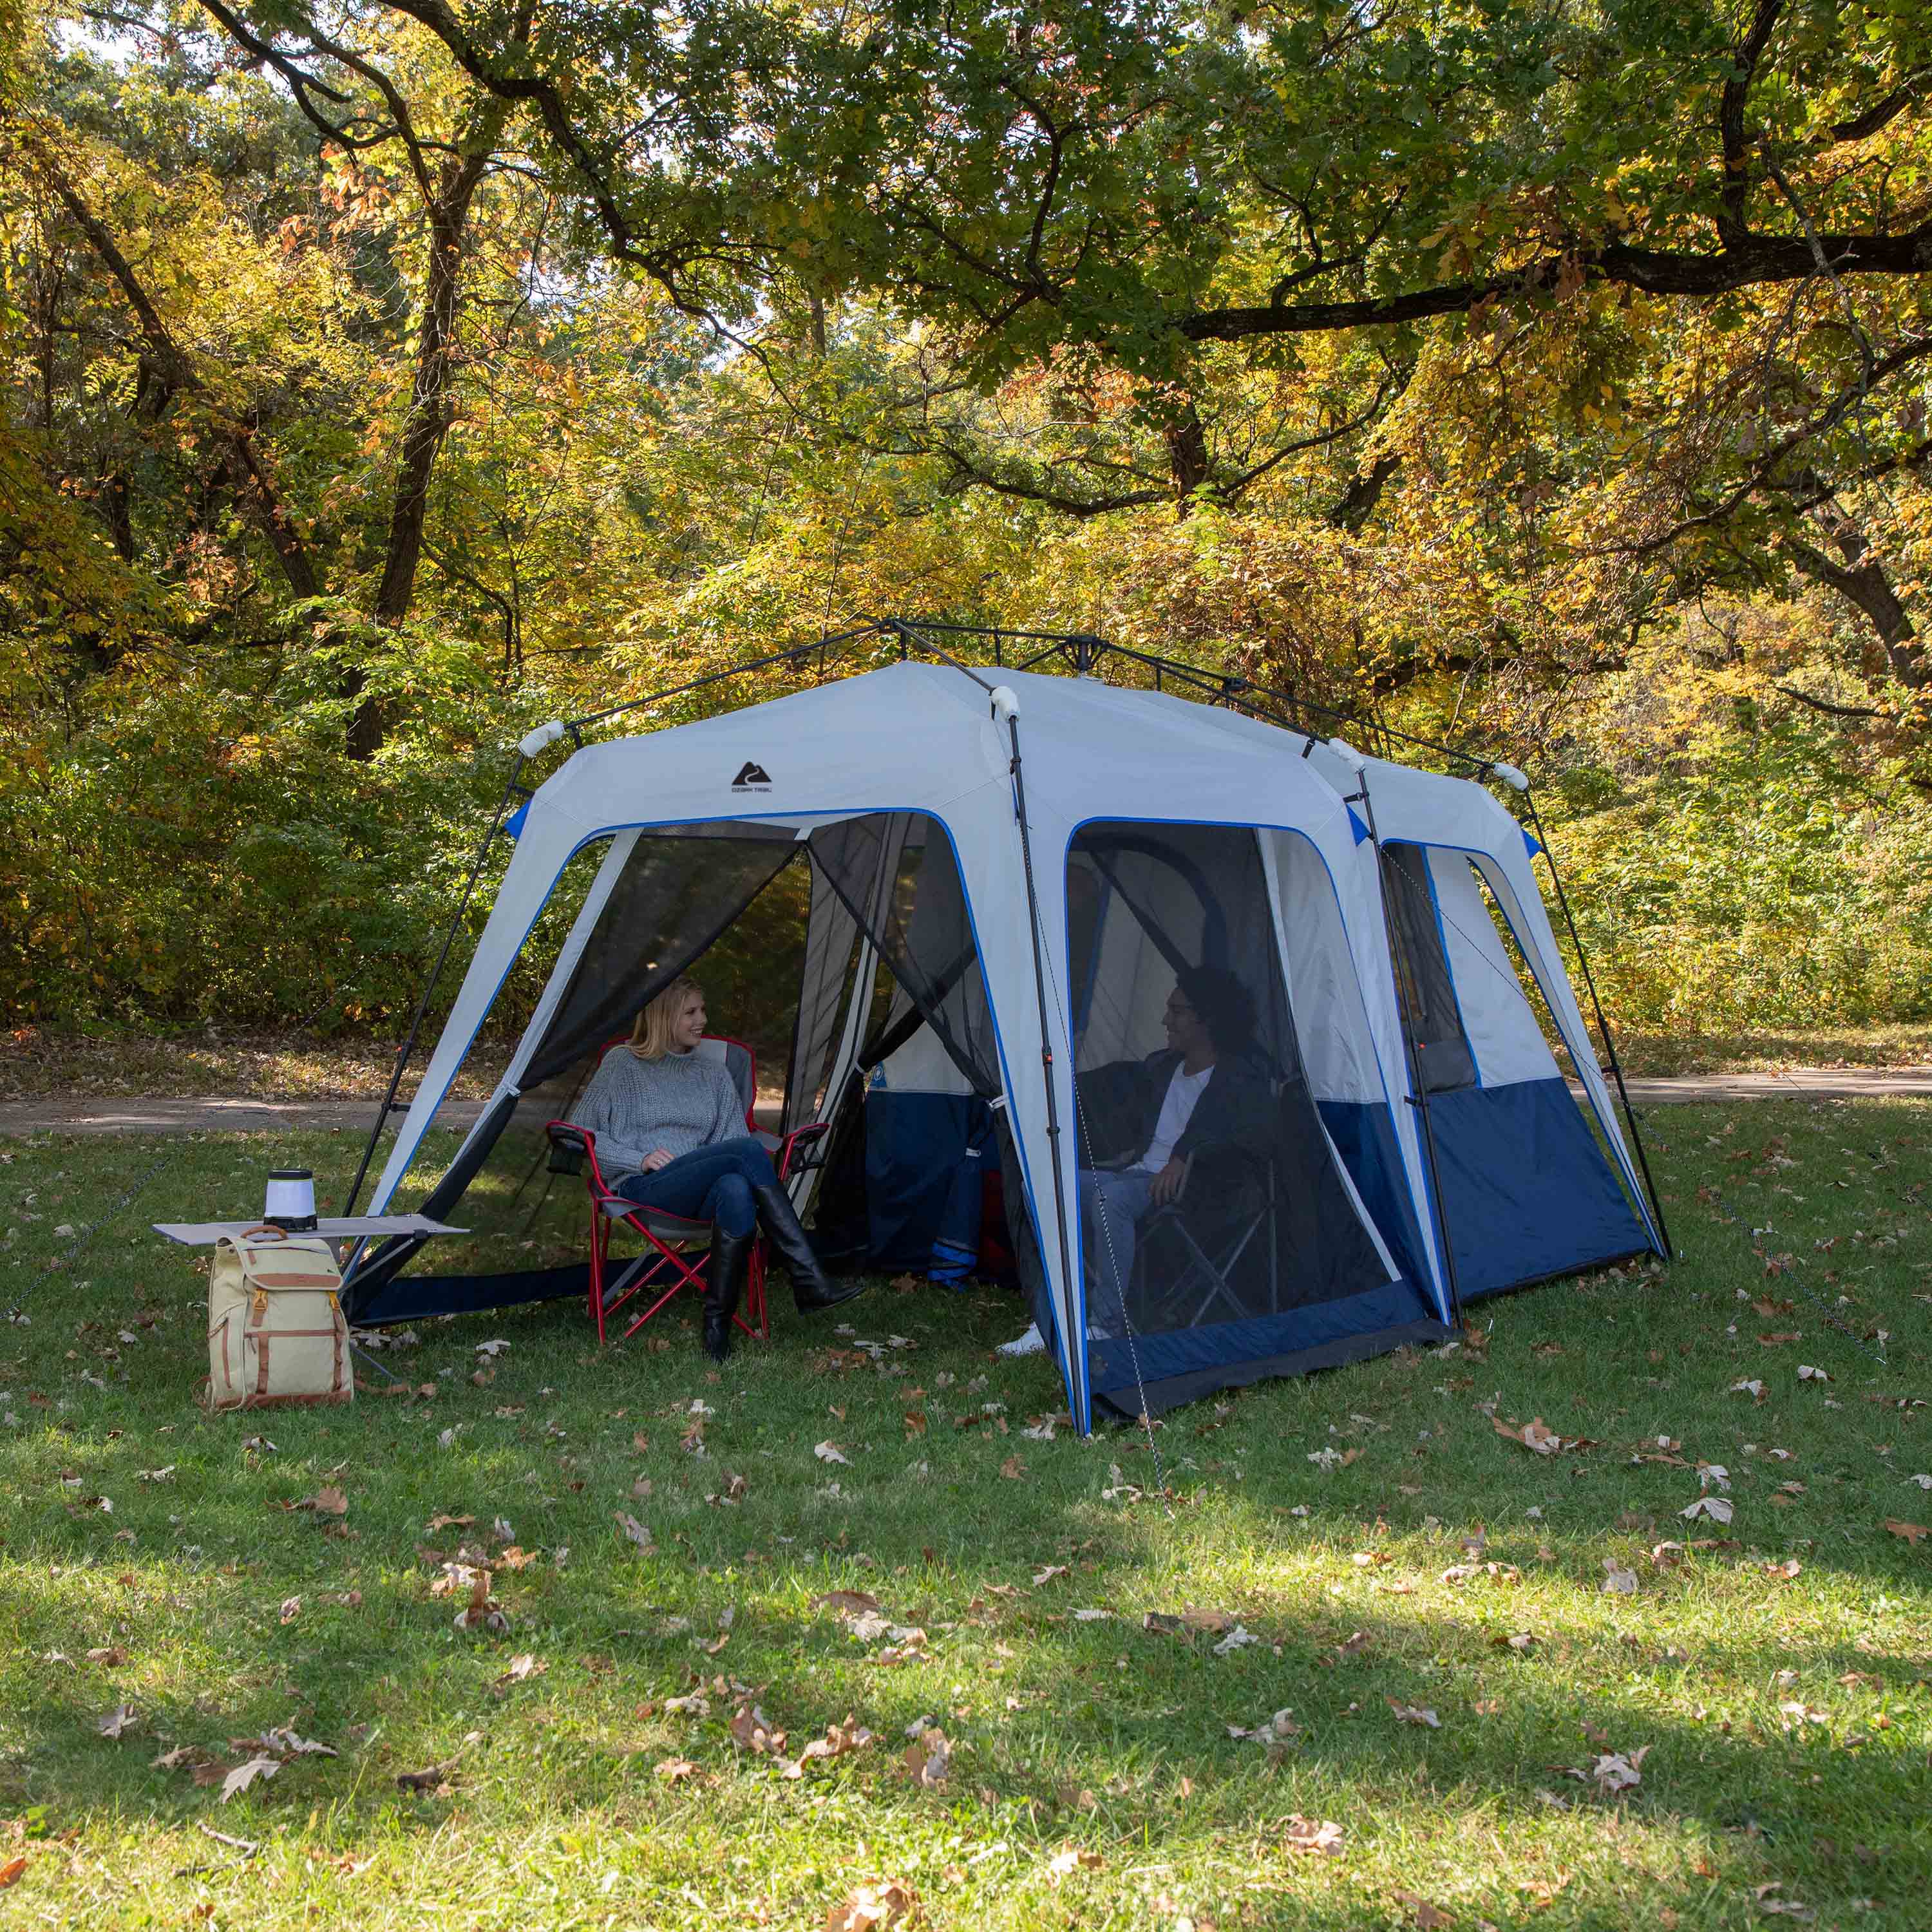 Ozark Trail 5-in-1 Convertible Instant Tent and Shelter